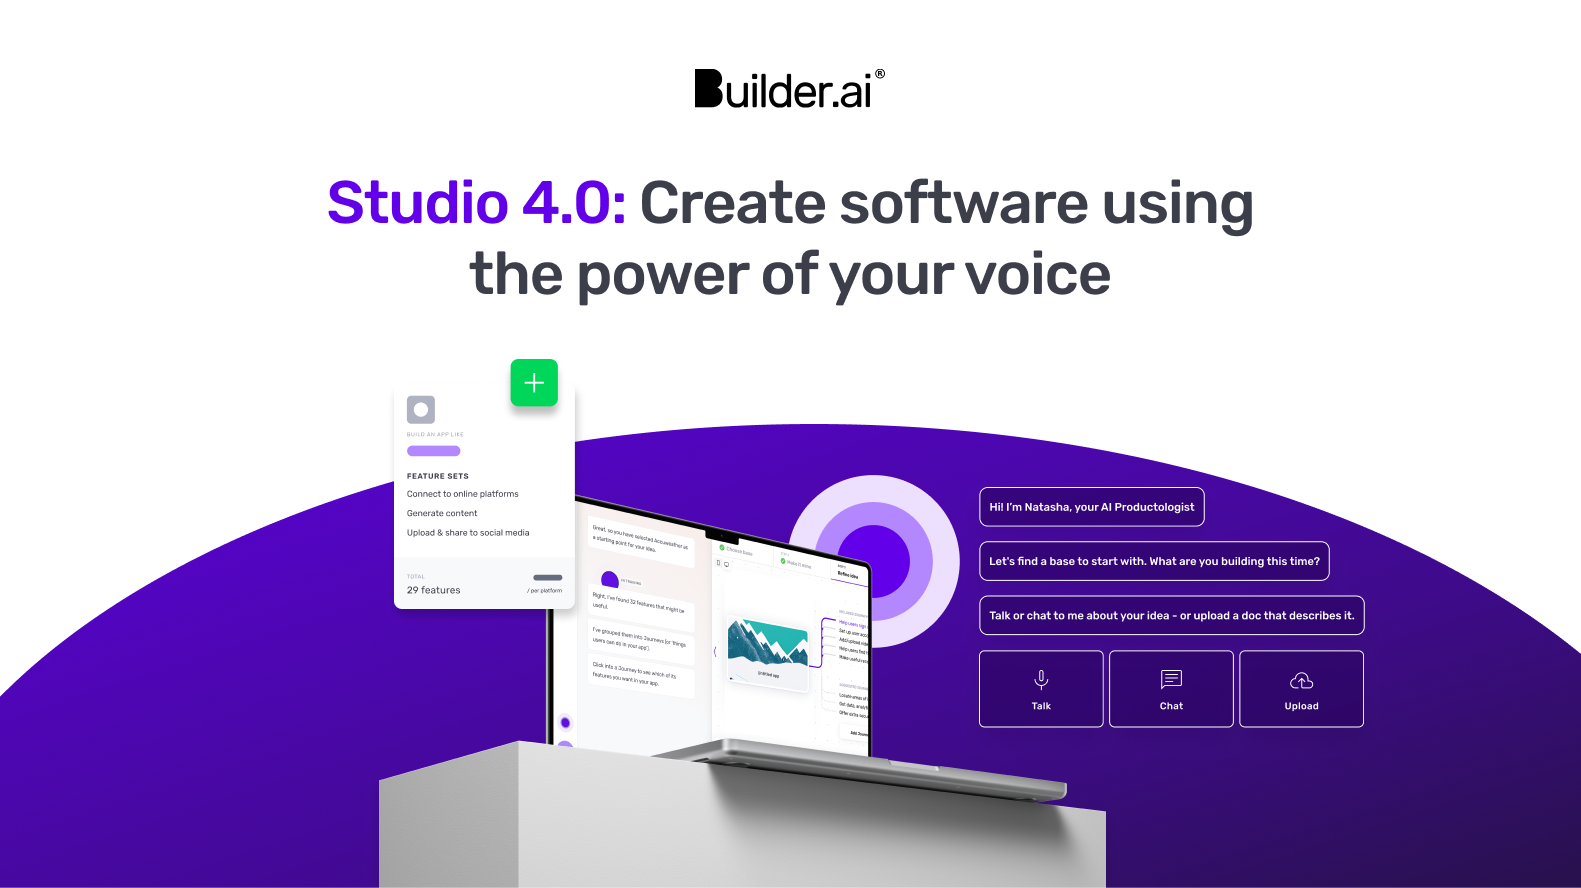 Studio 4.0: Create software using the power of your voice